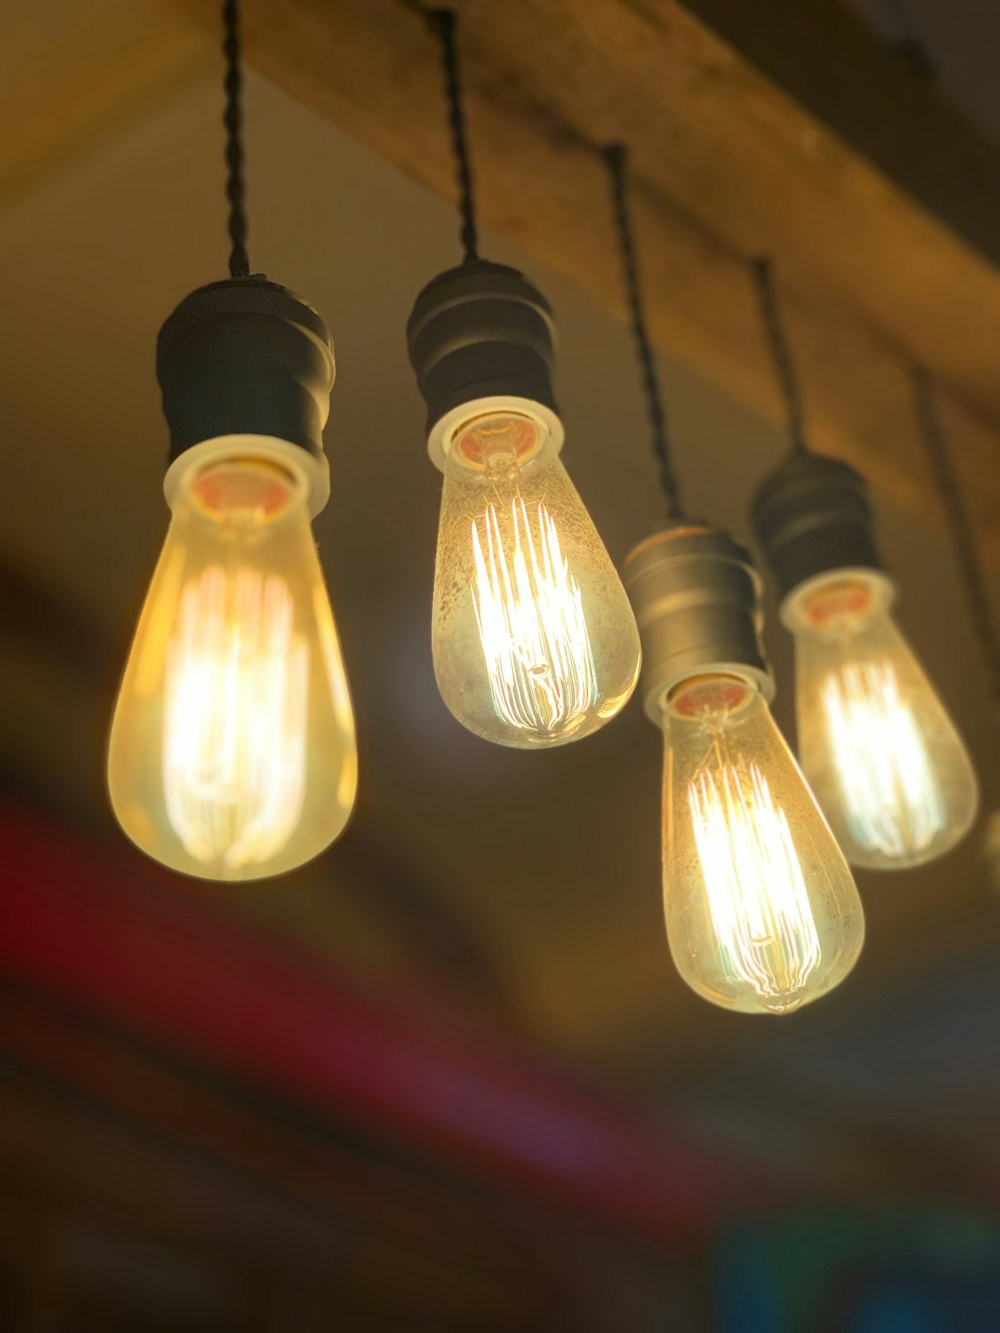 four yellow-and-black Edison light bulbs turned-on